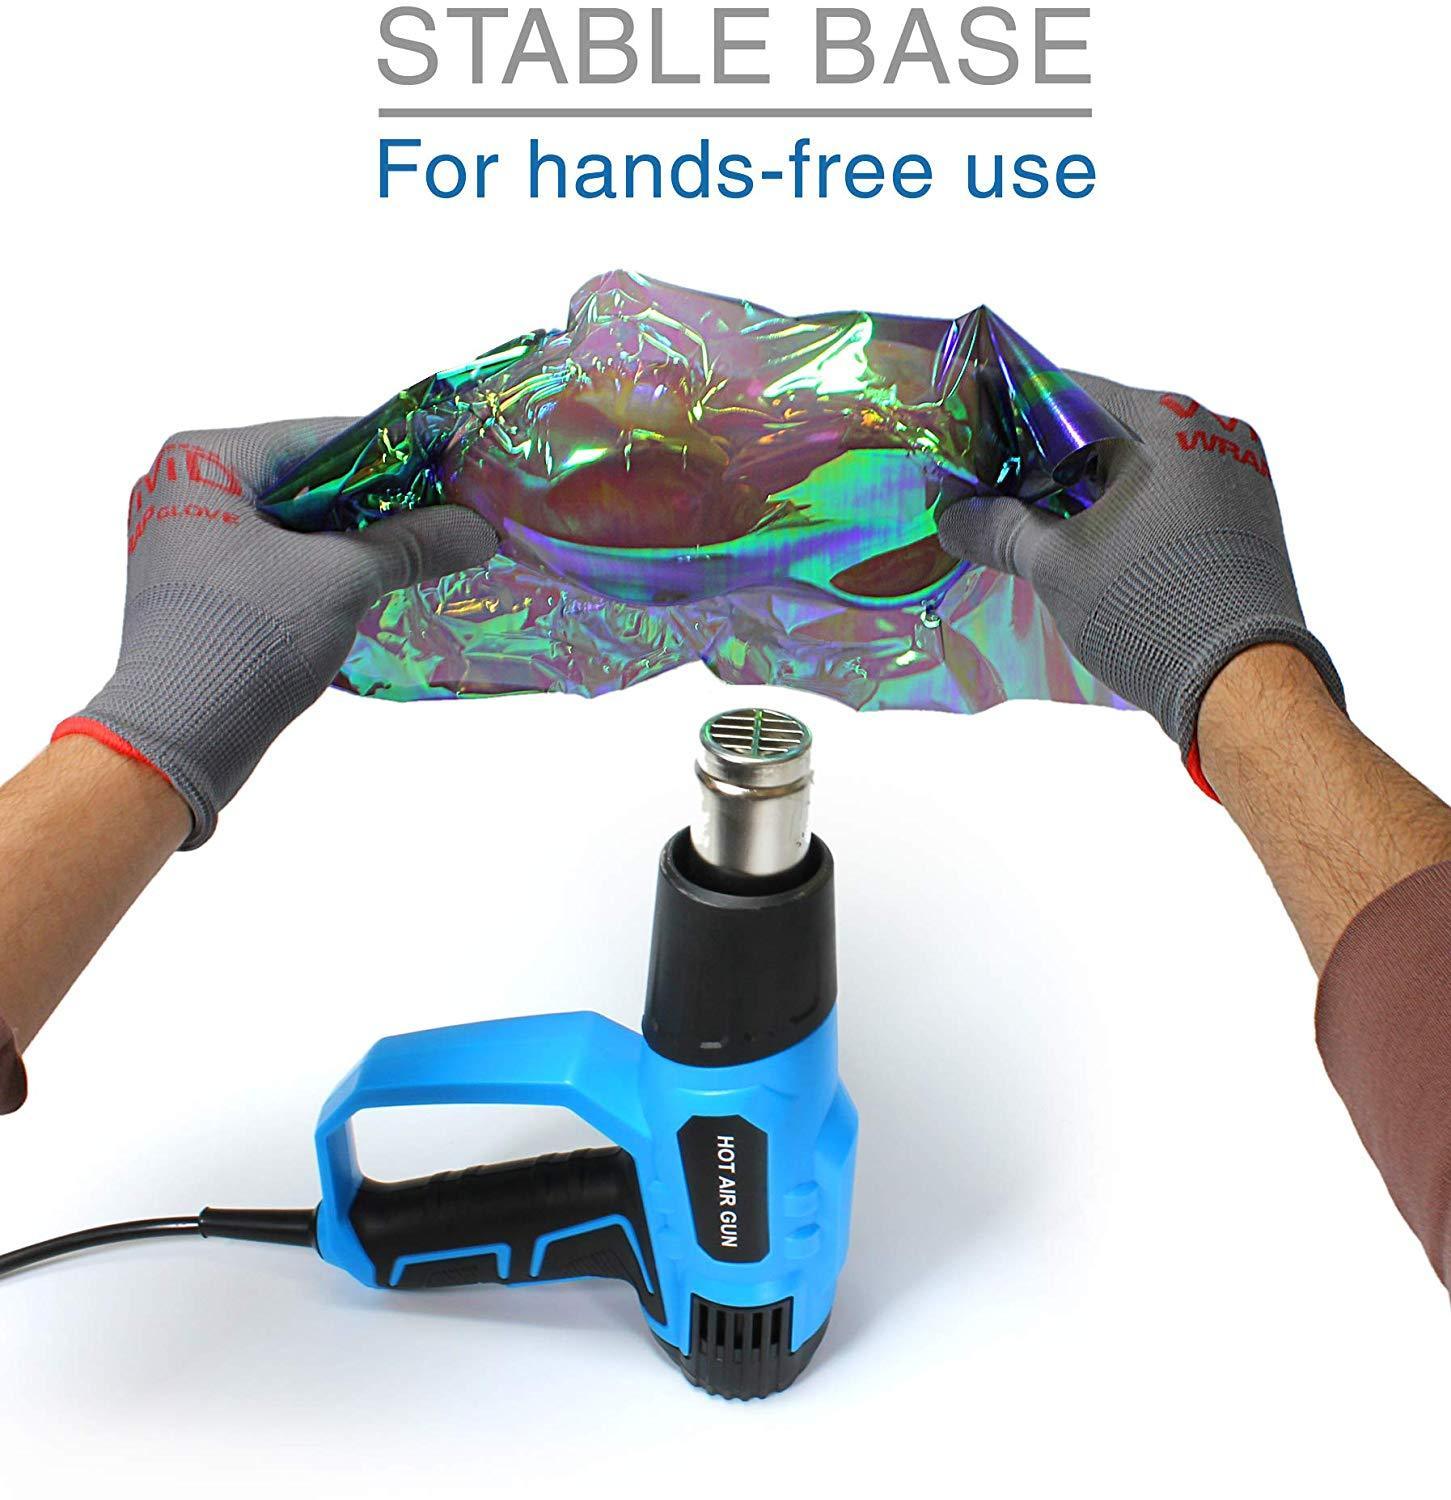 VViViD Scientific Heat Gun 1500w the best for Vinyl wrap and removal.